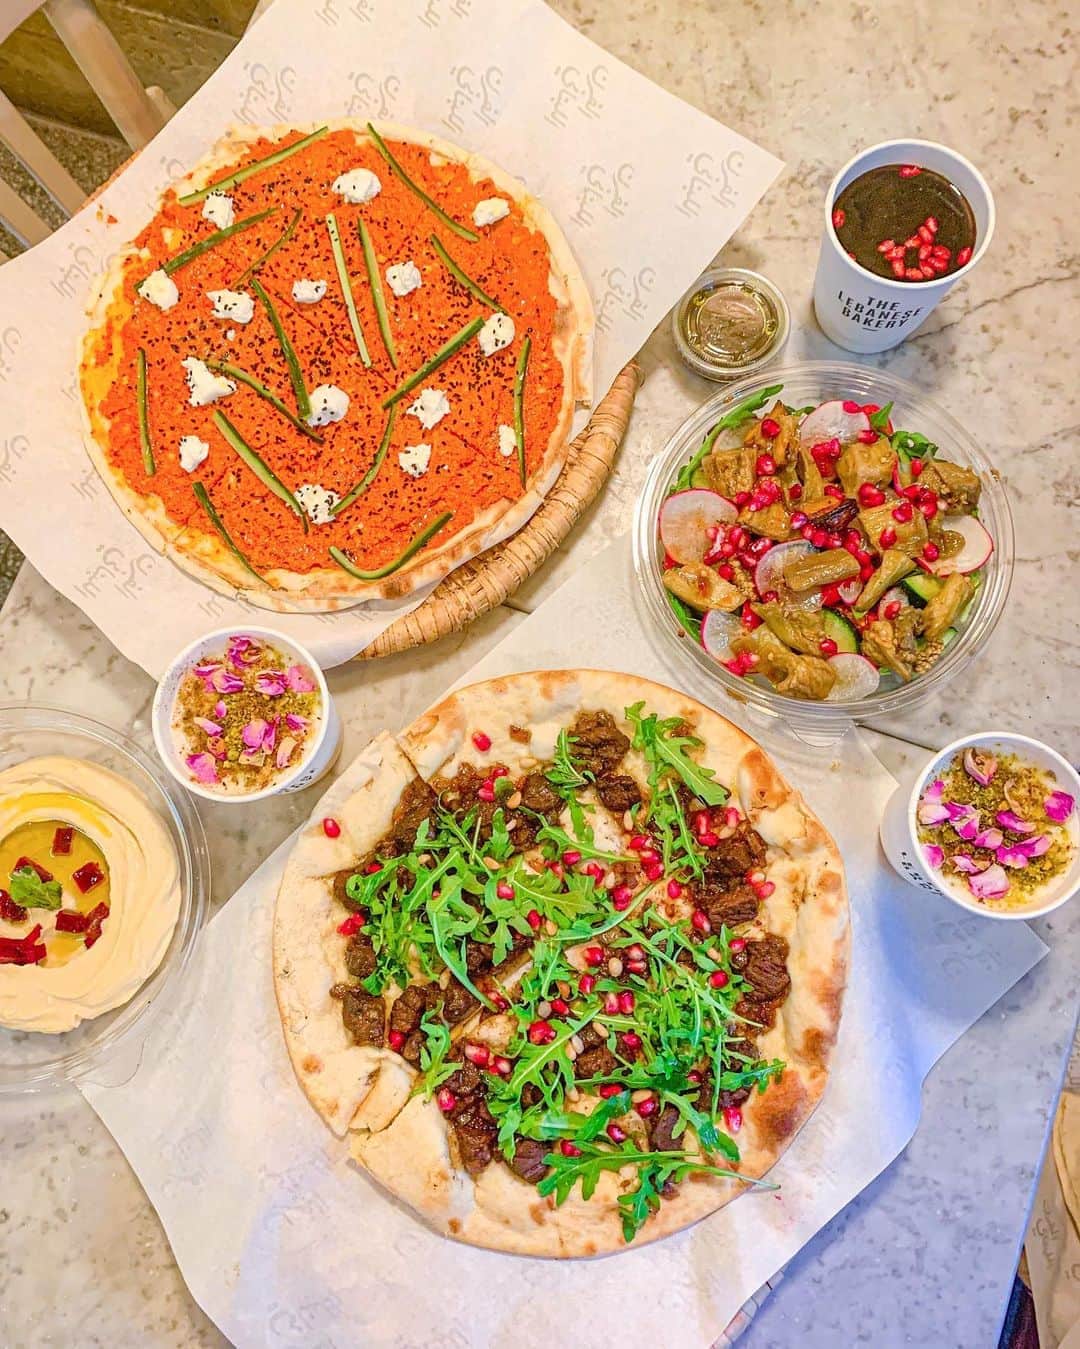 Eat With Steph & Coさんのインスタグラム写真 - (Eat With Steph & CoInstagram)「😌 My dream breakfast would be waking up to the warm, aromatic Lebanese flatbreads freshly baked at @thelebanesebakeryldn , topped with spice roasted peppers, creamy goat cheese, toasted pine nuts and much much more... ❤️⠀ ⠀ Super gutted about all the eateries closing in London this week, but if you can make a dash before Thursday I’d definitely recommend grabbing a bite here! ✨⠀ Otherwise, you can still order this scrumptious feast to takeaway from Thursday onwards, or get delivery via @deliveroo . And at the price of £6, I definitely can’t wait to eat here again! 😋#invite⠀ ⠀ 📸: @rain.sprout⠀ ⠀ 📍 Location: Covent Garden, Harrods ⠀ 💰 Price: £5-10pp⠀ 👨‍🍳 Cuisine: Lebanese⠀ ❤️ Best for: Baked goods⠀ ☎️ Book ahead: Optional⠀ 🌱 Veg options: Yes⠀ 🍽 Top dishes: ⠀  - Muhammara & Labneh⠀  - Ras Asfour⠀  - Sahlab (drink)⠀ ⠀ ⠀ ⠀ ⠀ ⠀ #foodstagram #eeeeeats #forkyeah #londonfood #timeoutlondon #londonrestaurants #toplondonrestaurant #eatlondon #infatuationlondon #foodenvy #takeaway⠀ #lebanesebakeryldn #lebanesebakery #thelebanesebakery #lebaneseflatbread #lebanesecuisine #lebanoneats #lebanese #mediterraneanfood #freshlybaked #lebanesepastry #pomegranate #manousheh #manoush #manakeesh #muhammara #labneh #sahlab」11月3日 17時14分 - eatwithsteph_ldn